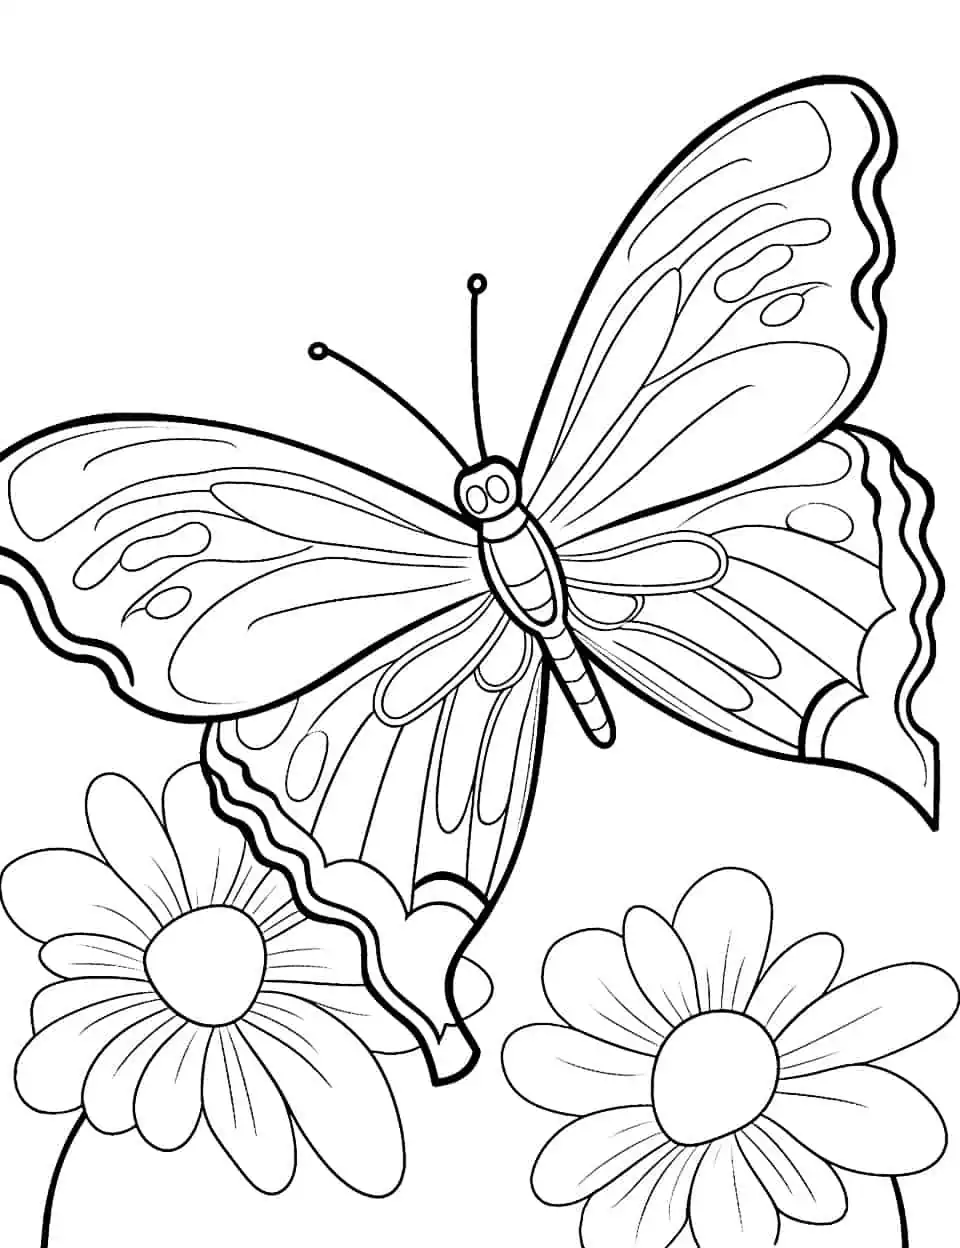 Blossoming Beauty Butterfly Coloring Page - A coloring page showcasing a butterfly gracefully landing on a blooming flower.